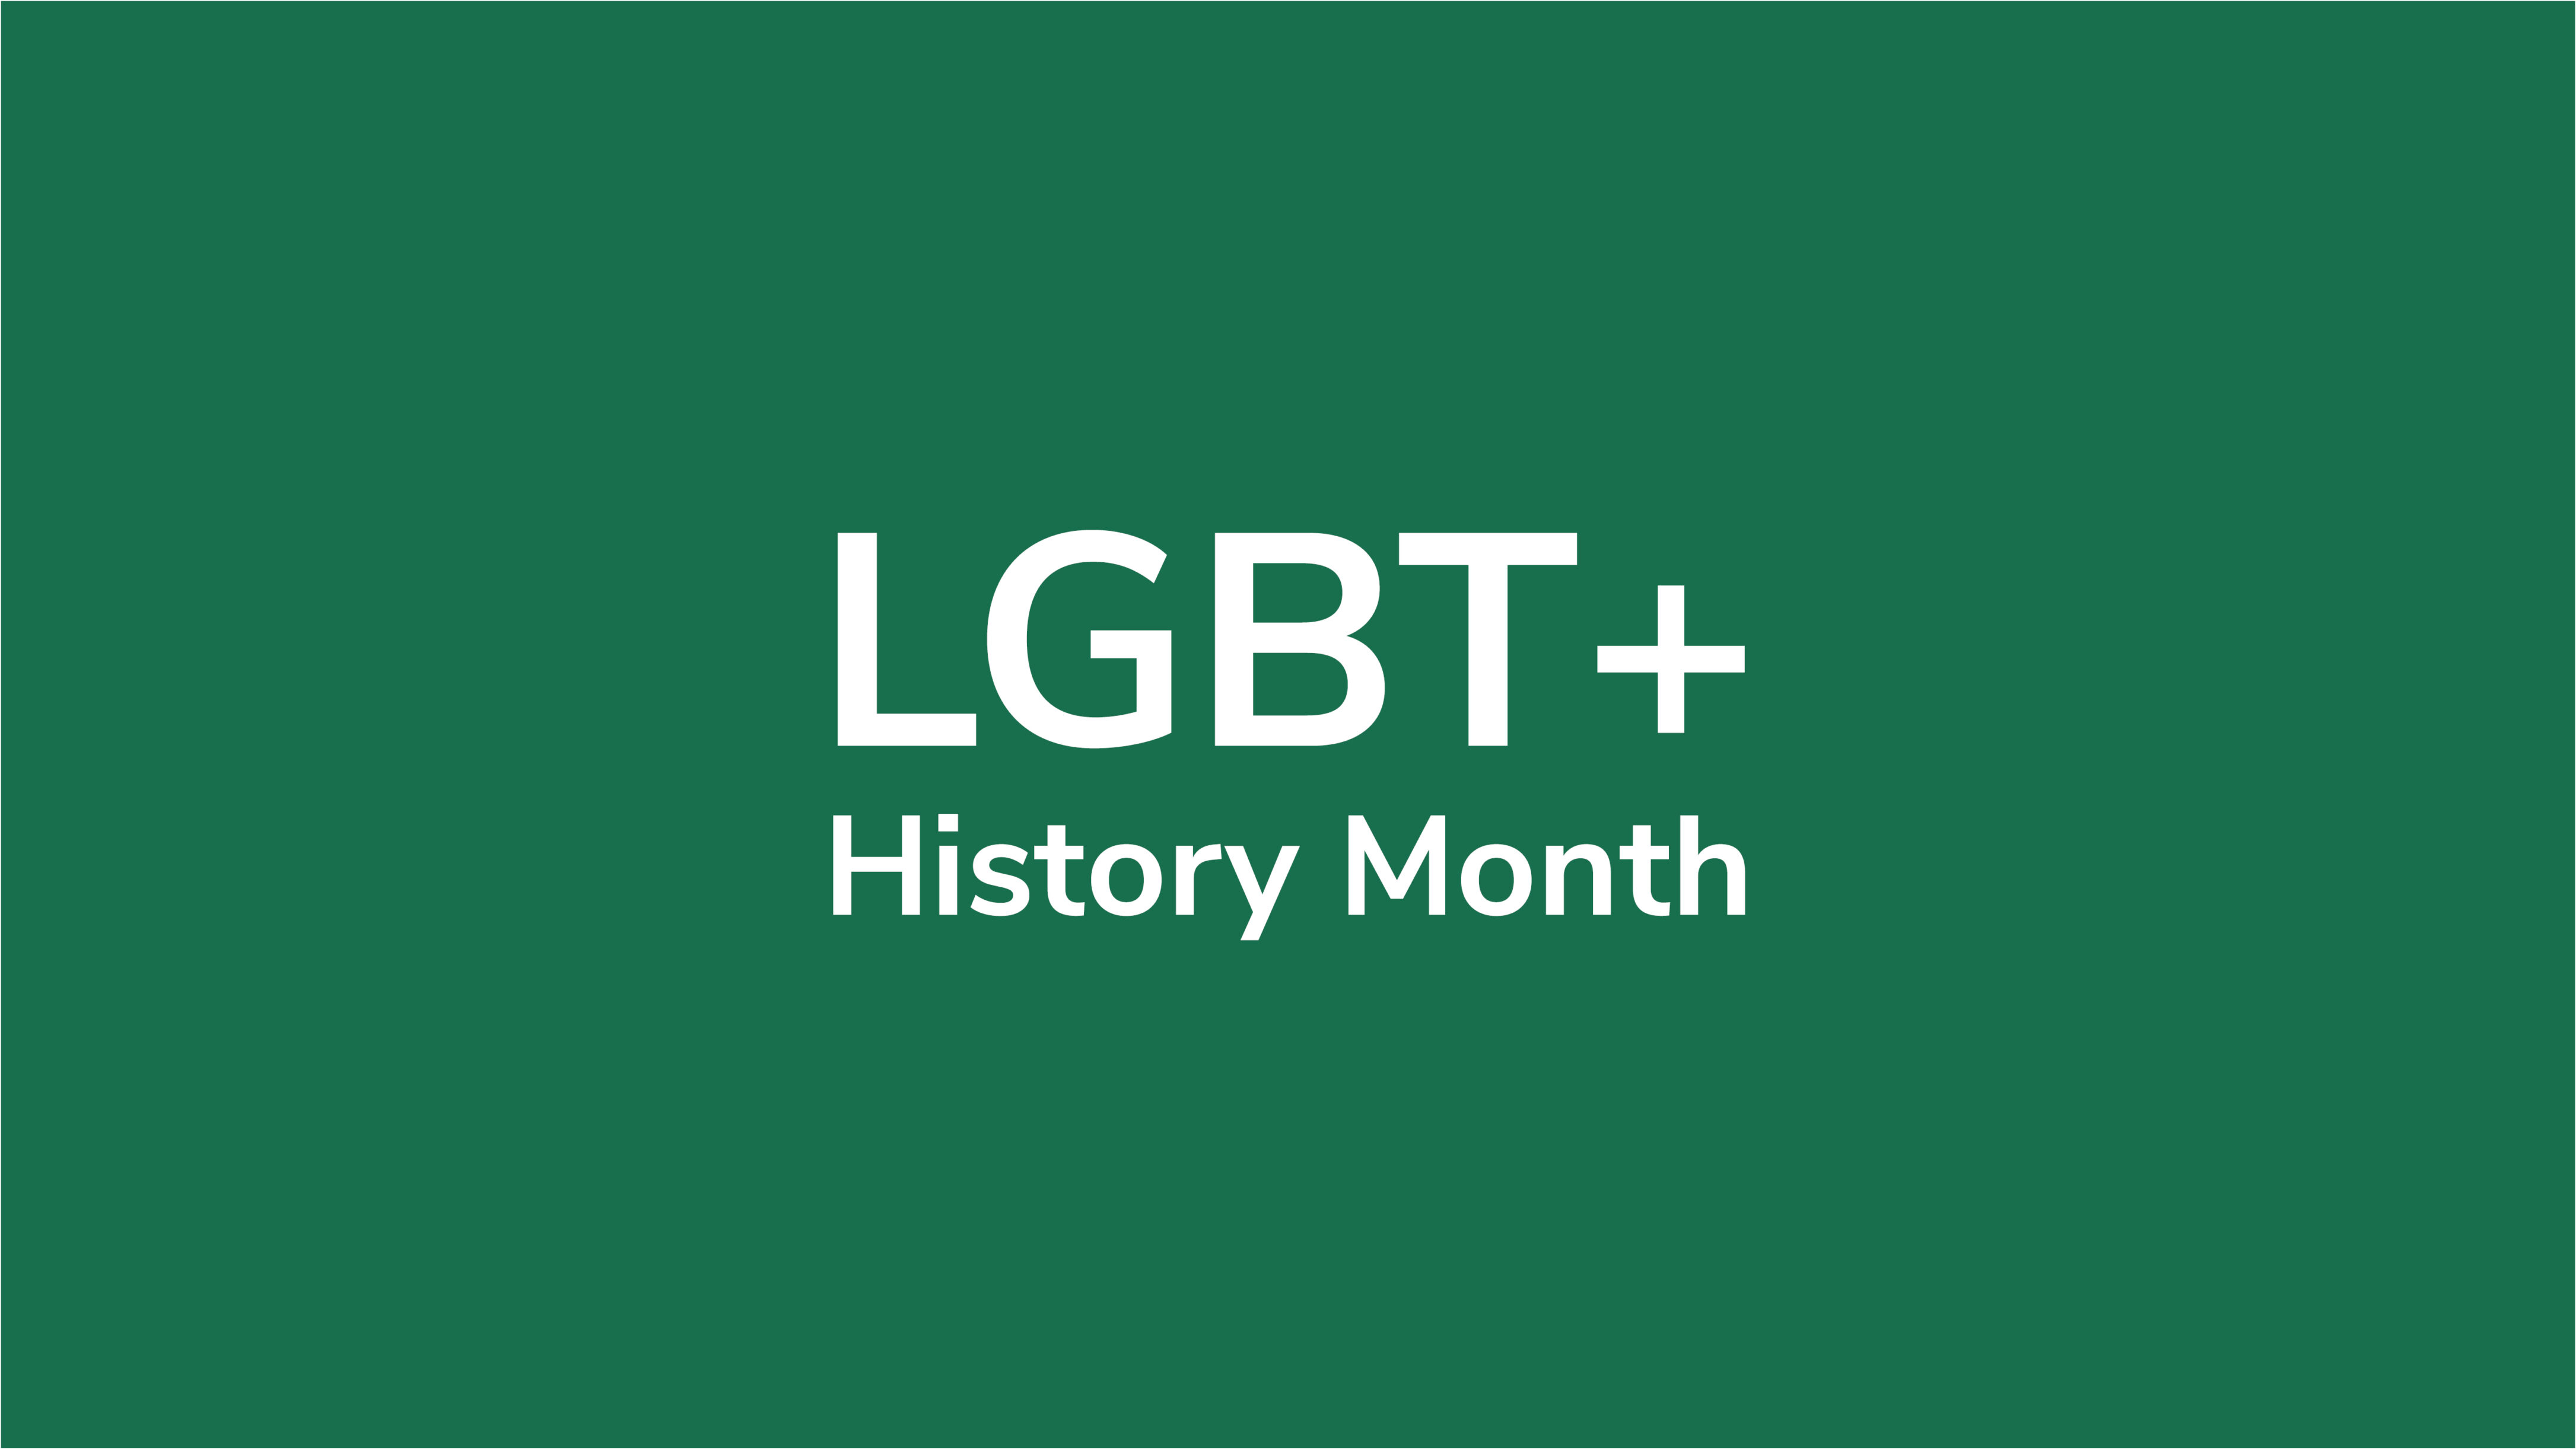 Green box with white writing that says LGBT+ History Month